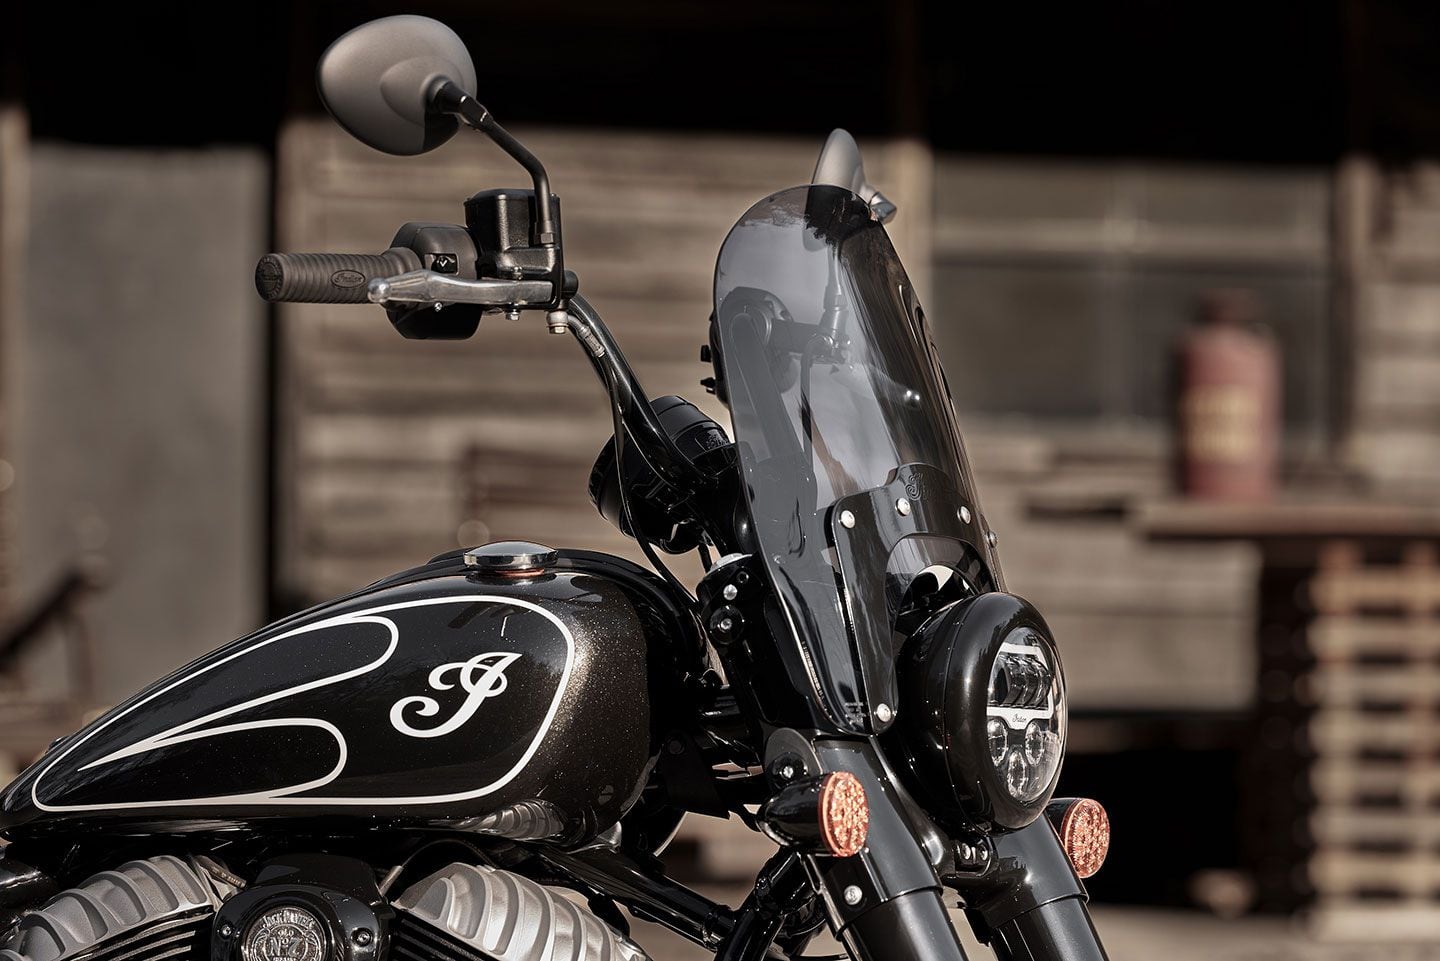 The tinted Klock Werks Flared Deflector adds a bit of function and subtle style up front.